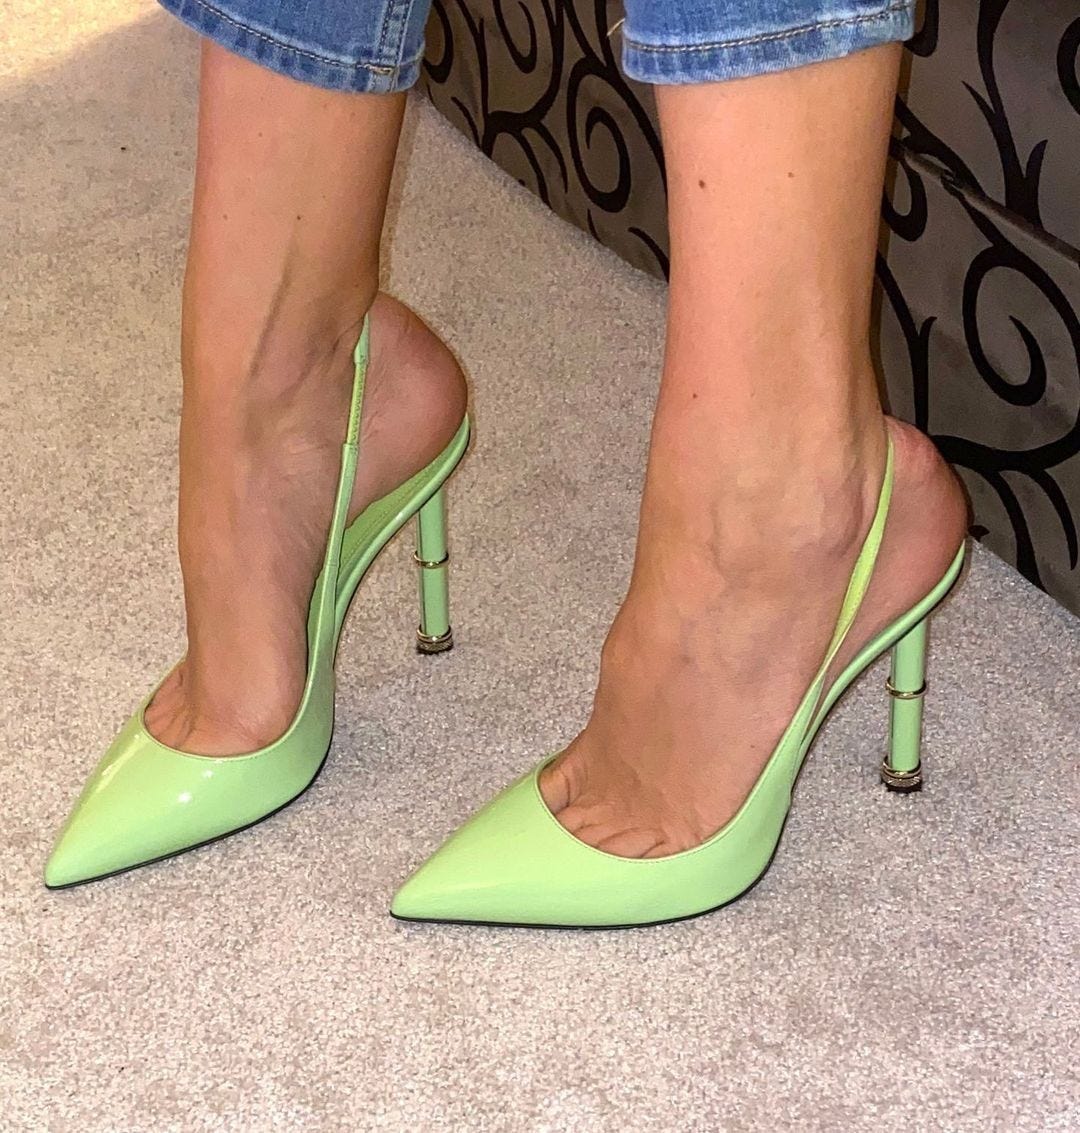 APPLE GREEN: with its shiny apple green colour and a three-ring heel, the @alevimilano Valeria slingback pumps will add a glamorous touch to your looks.
Available in store at @genteroma Via del Babuino, 77.

#GenteRoma #AleviMilano #SS22